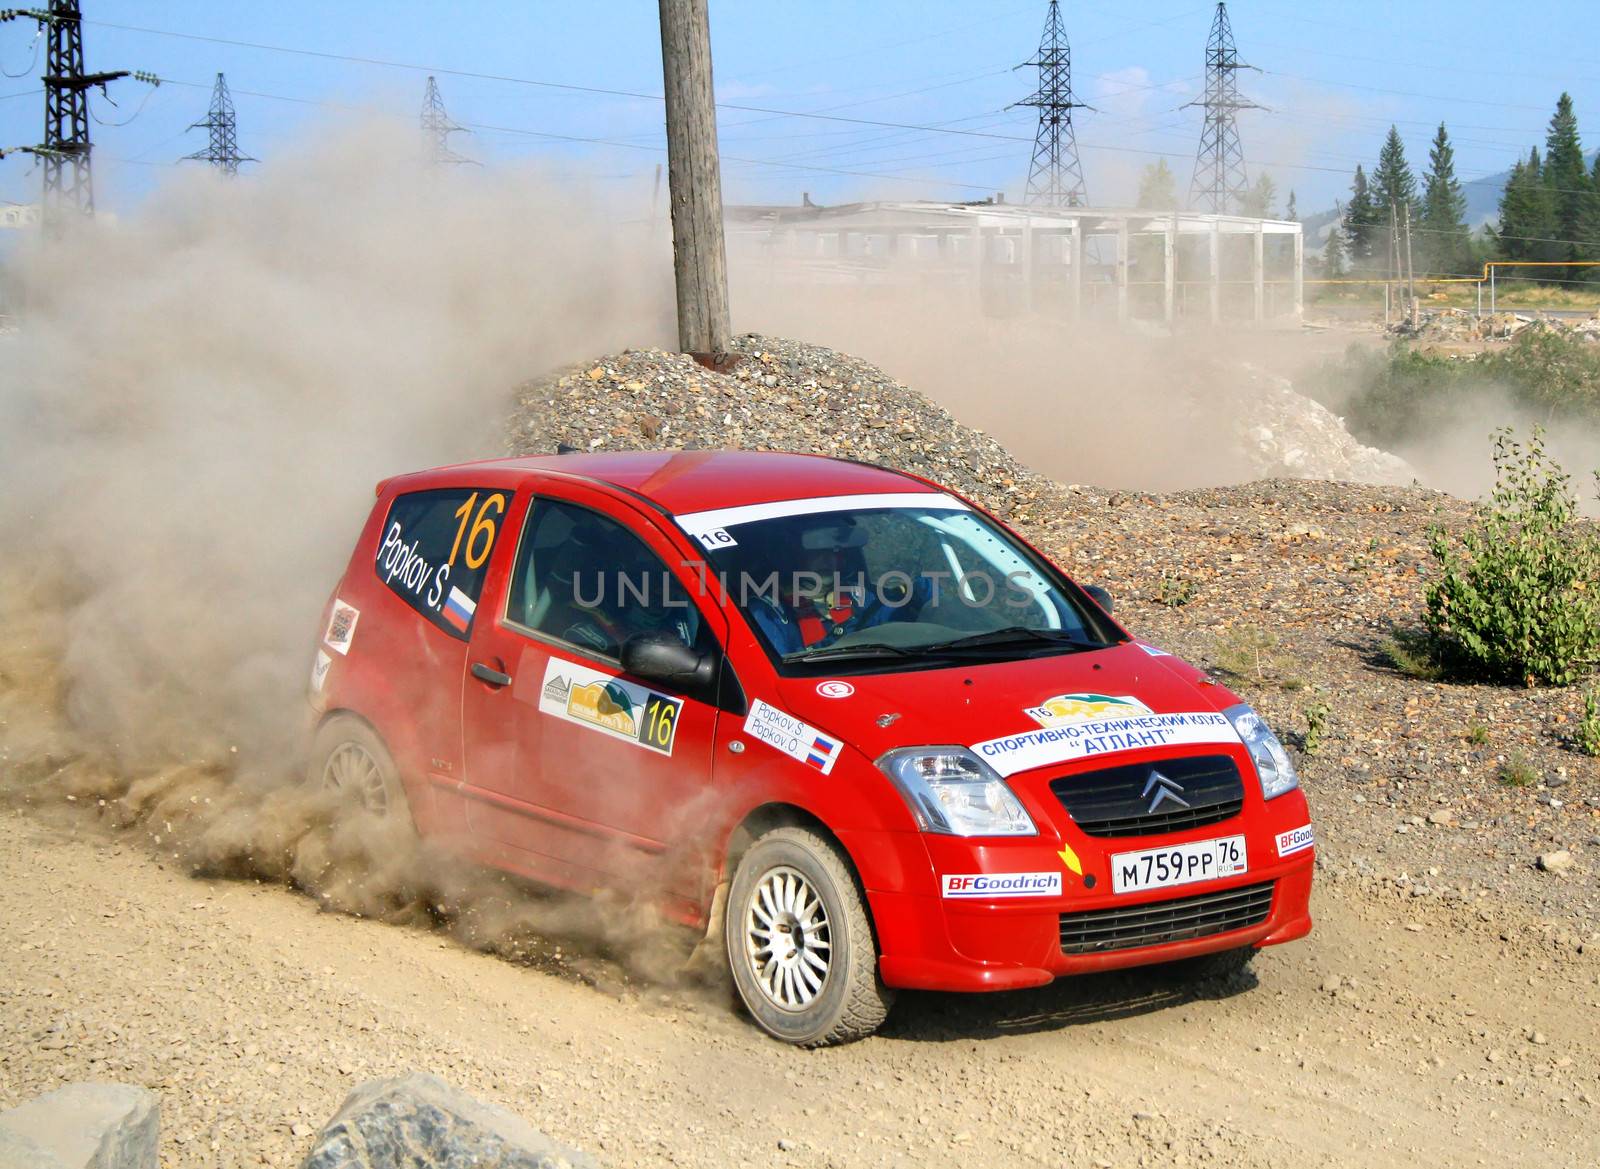 BAKAL, RUSSIA - AUGUST 13: Sergey Popkov's Citroen C2 (No. 16) competes at the annual Rally Southern Ural on August 13, 2010 in Bakal, Satka district, Chelyabinsk region, Russia.